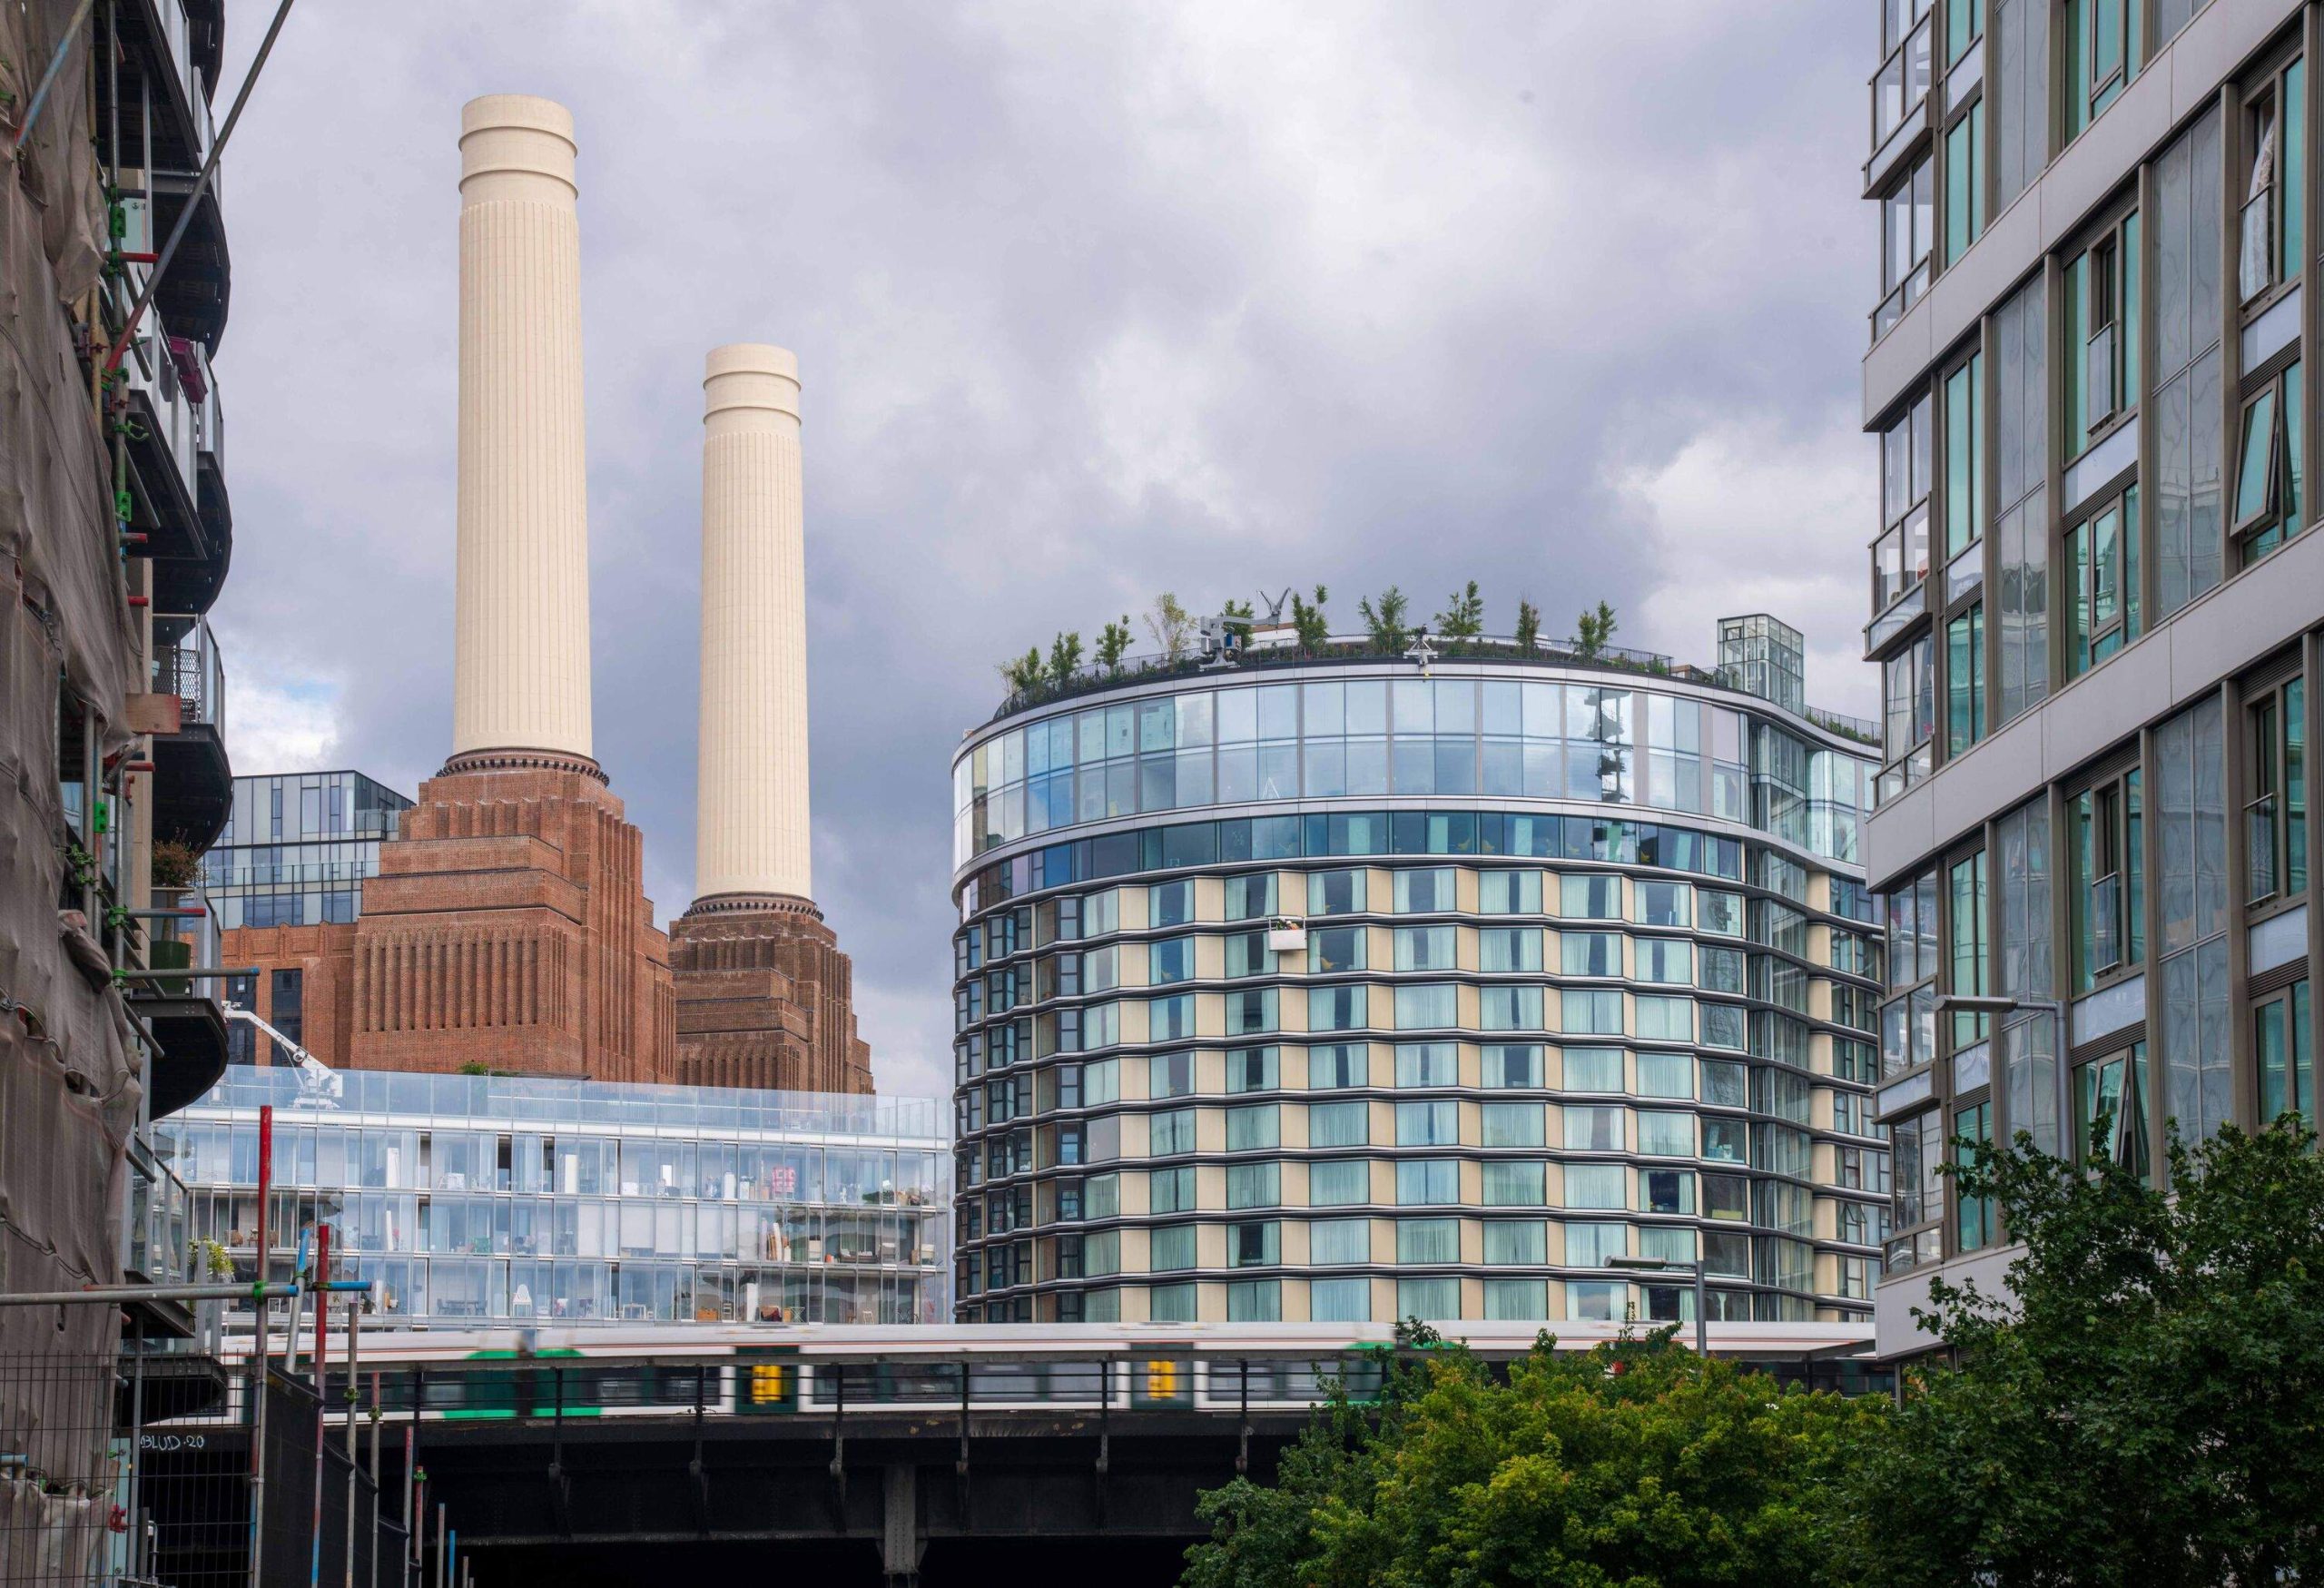 Battersea Power Station with new buildings and train passing